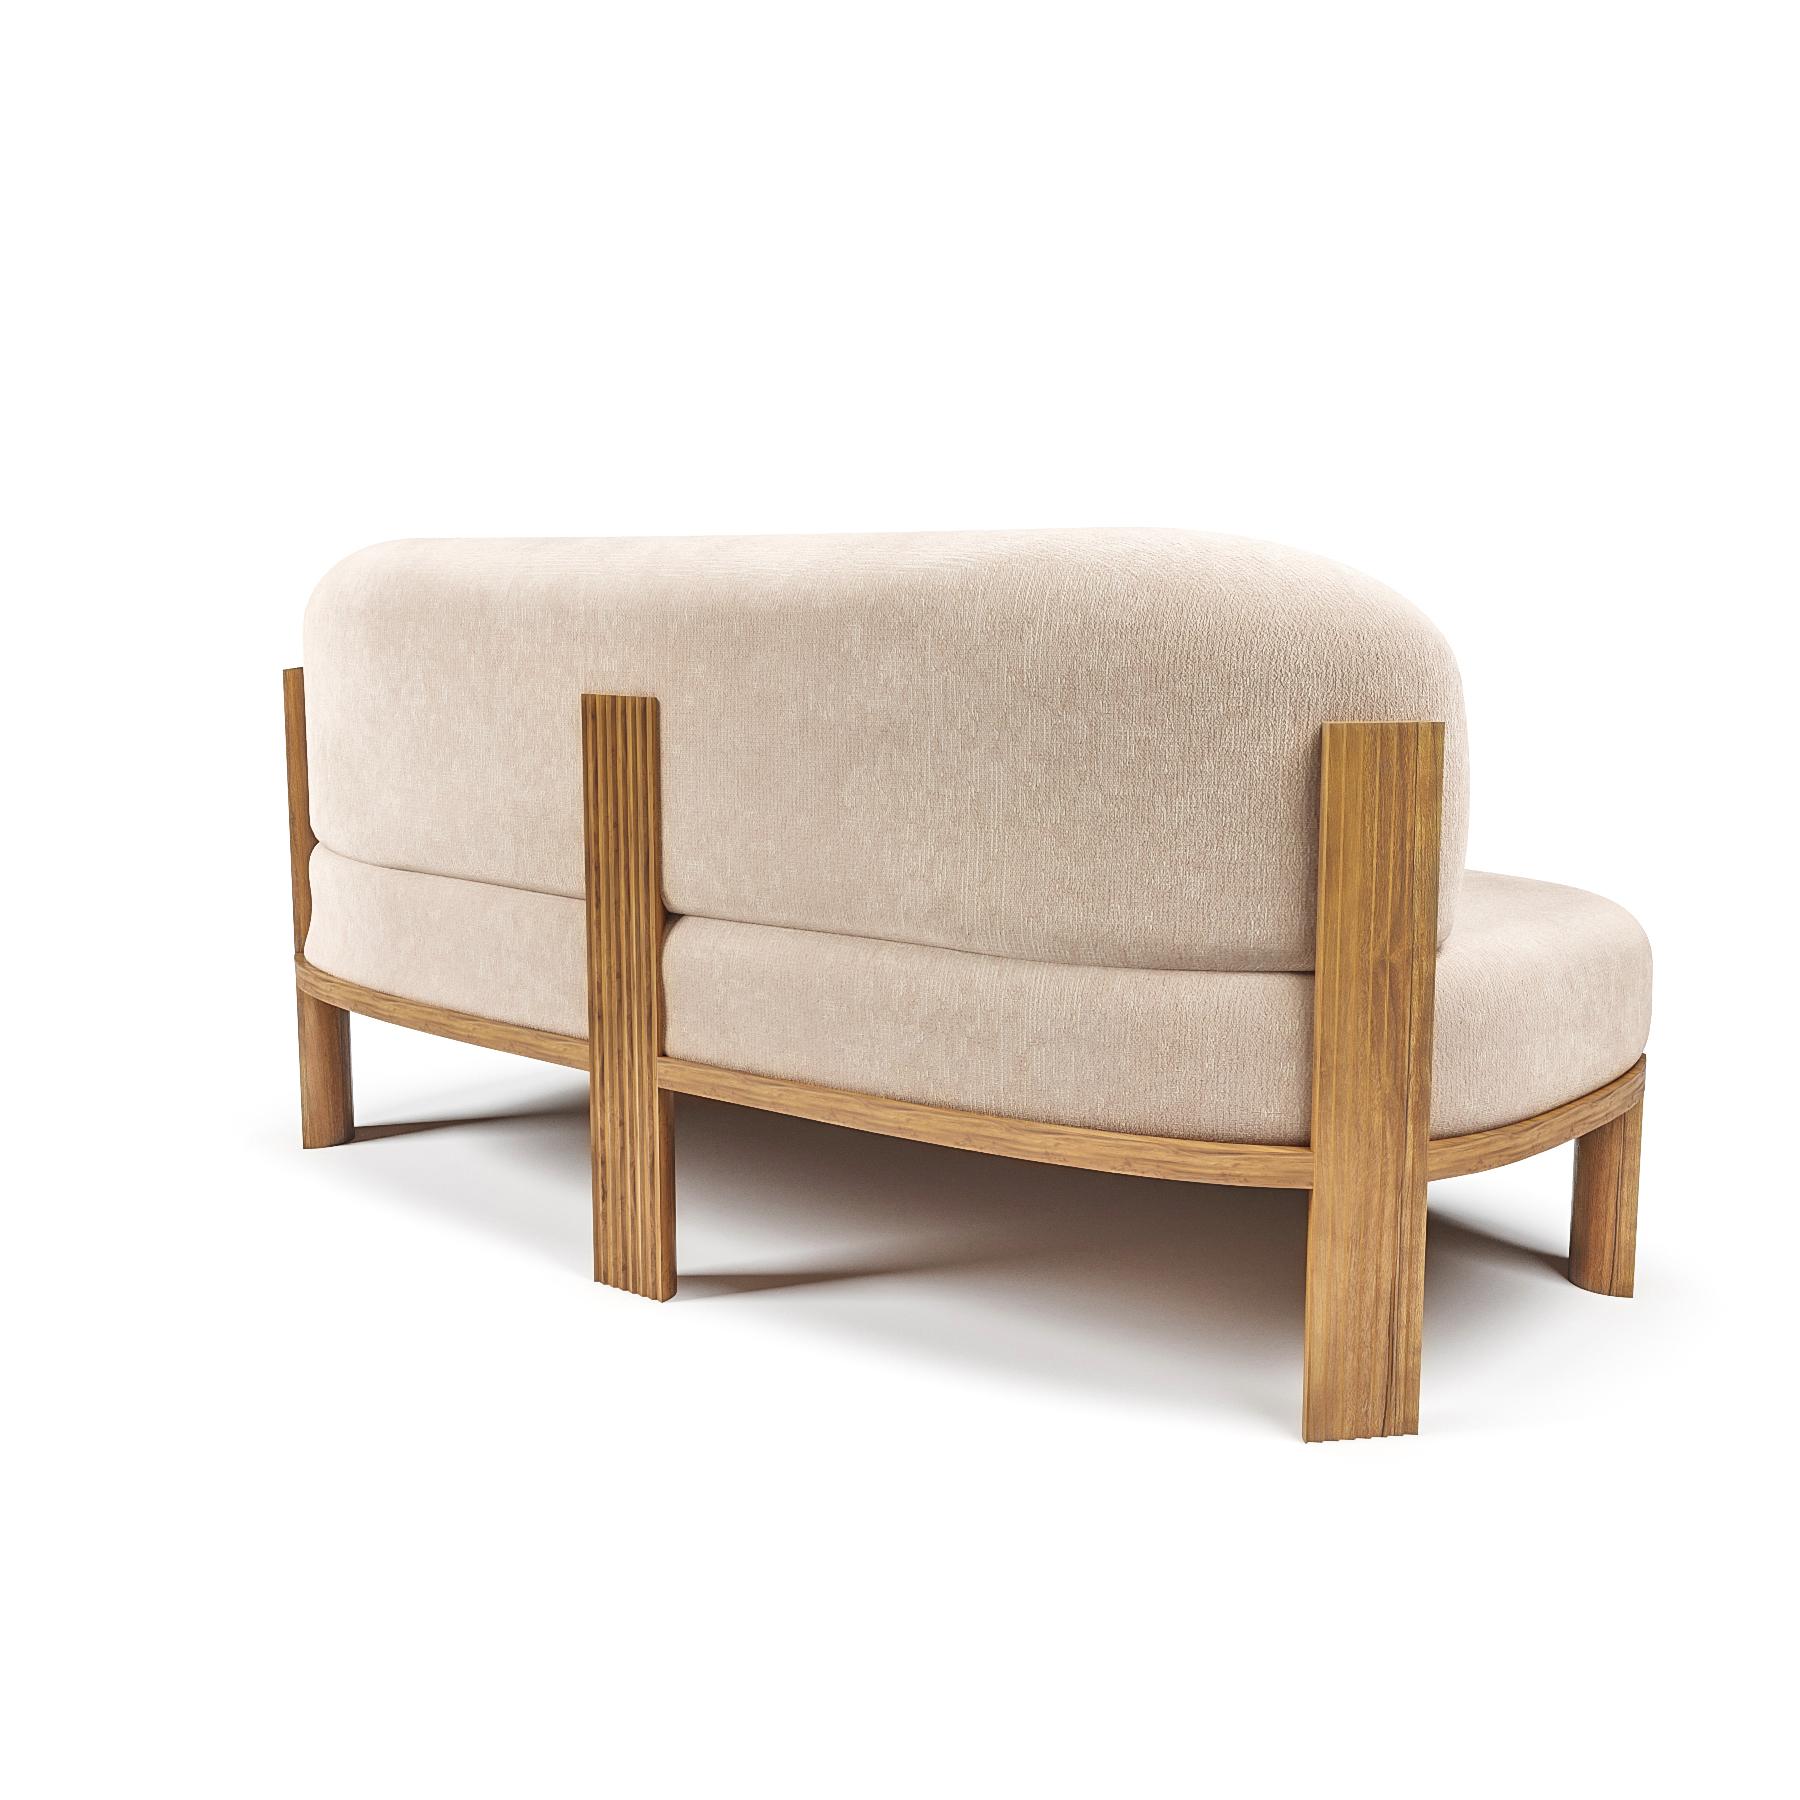 Portuguese Contemporary Modern European 111 Sofa in Cream Fabric & Oak Wood by Collector For Sale